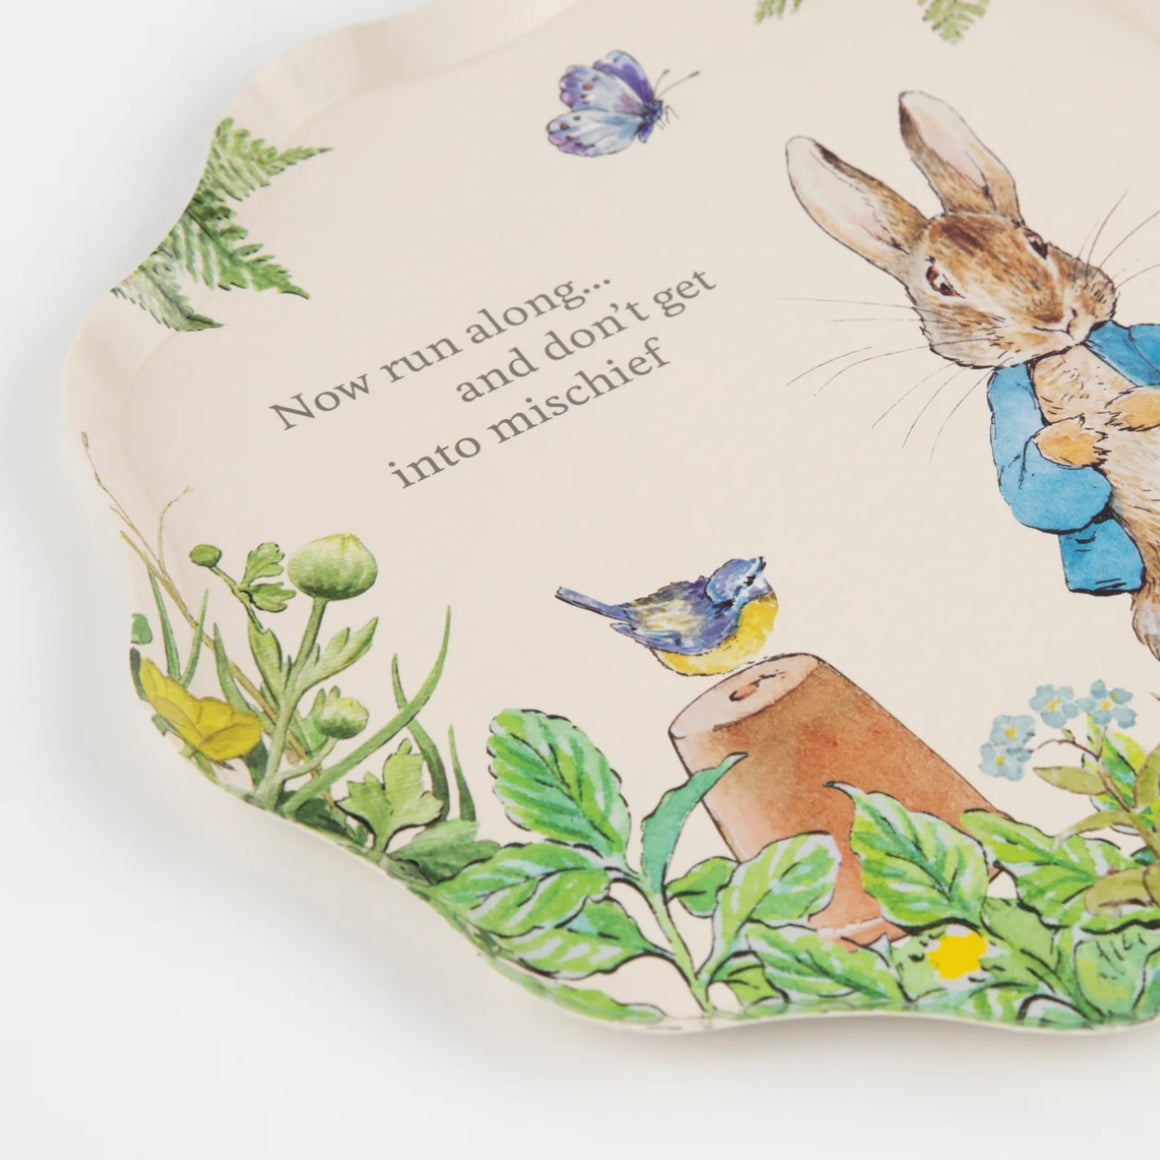 PLATES LARGE SIDE - ANIMAL BUNNY PETER RABBIT IN THE GARDEN